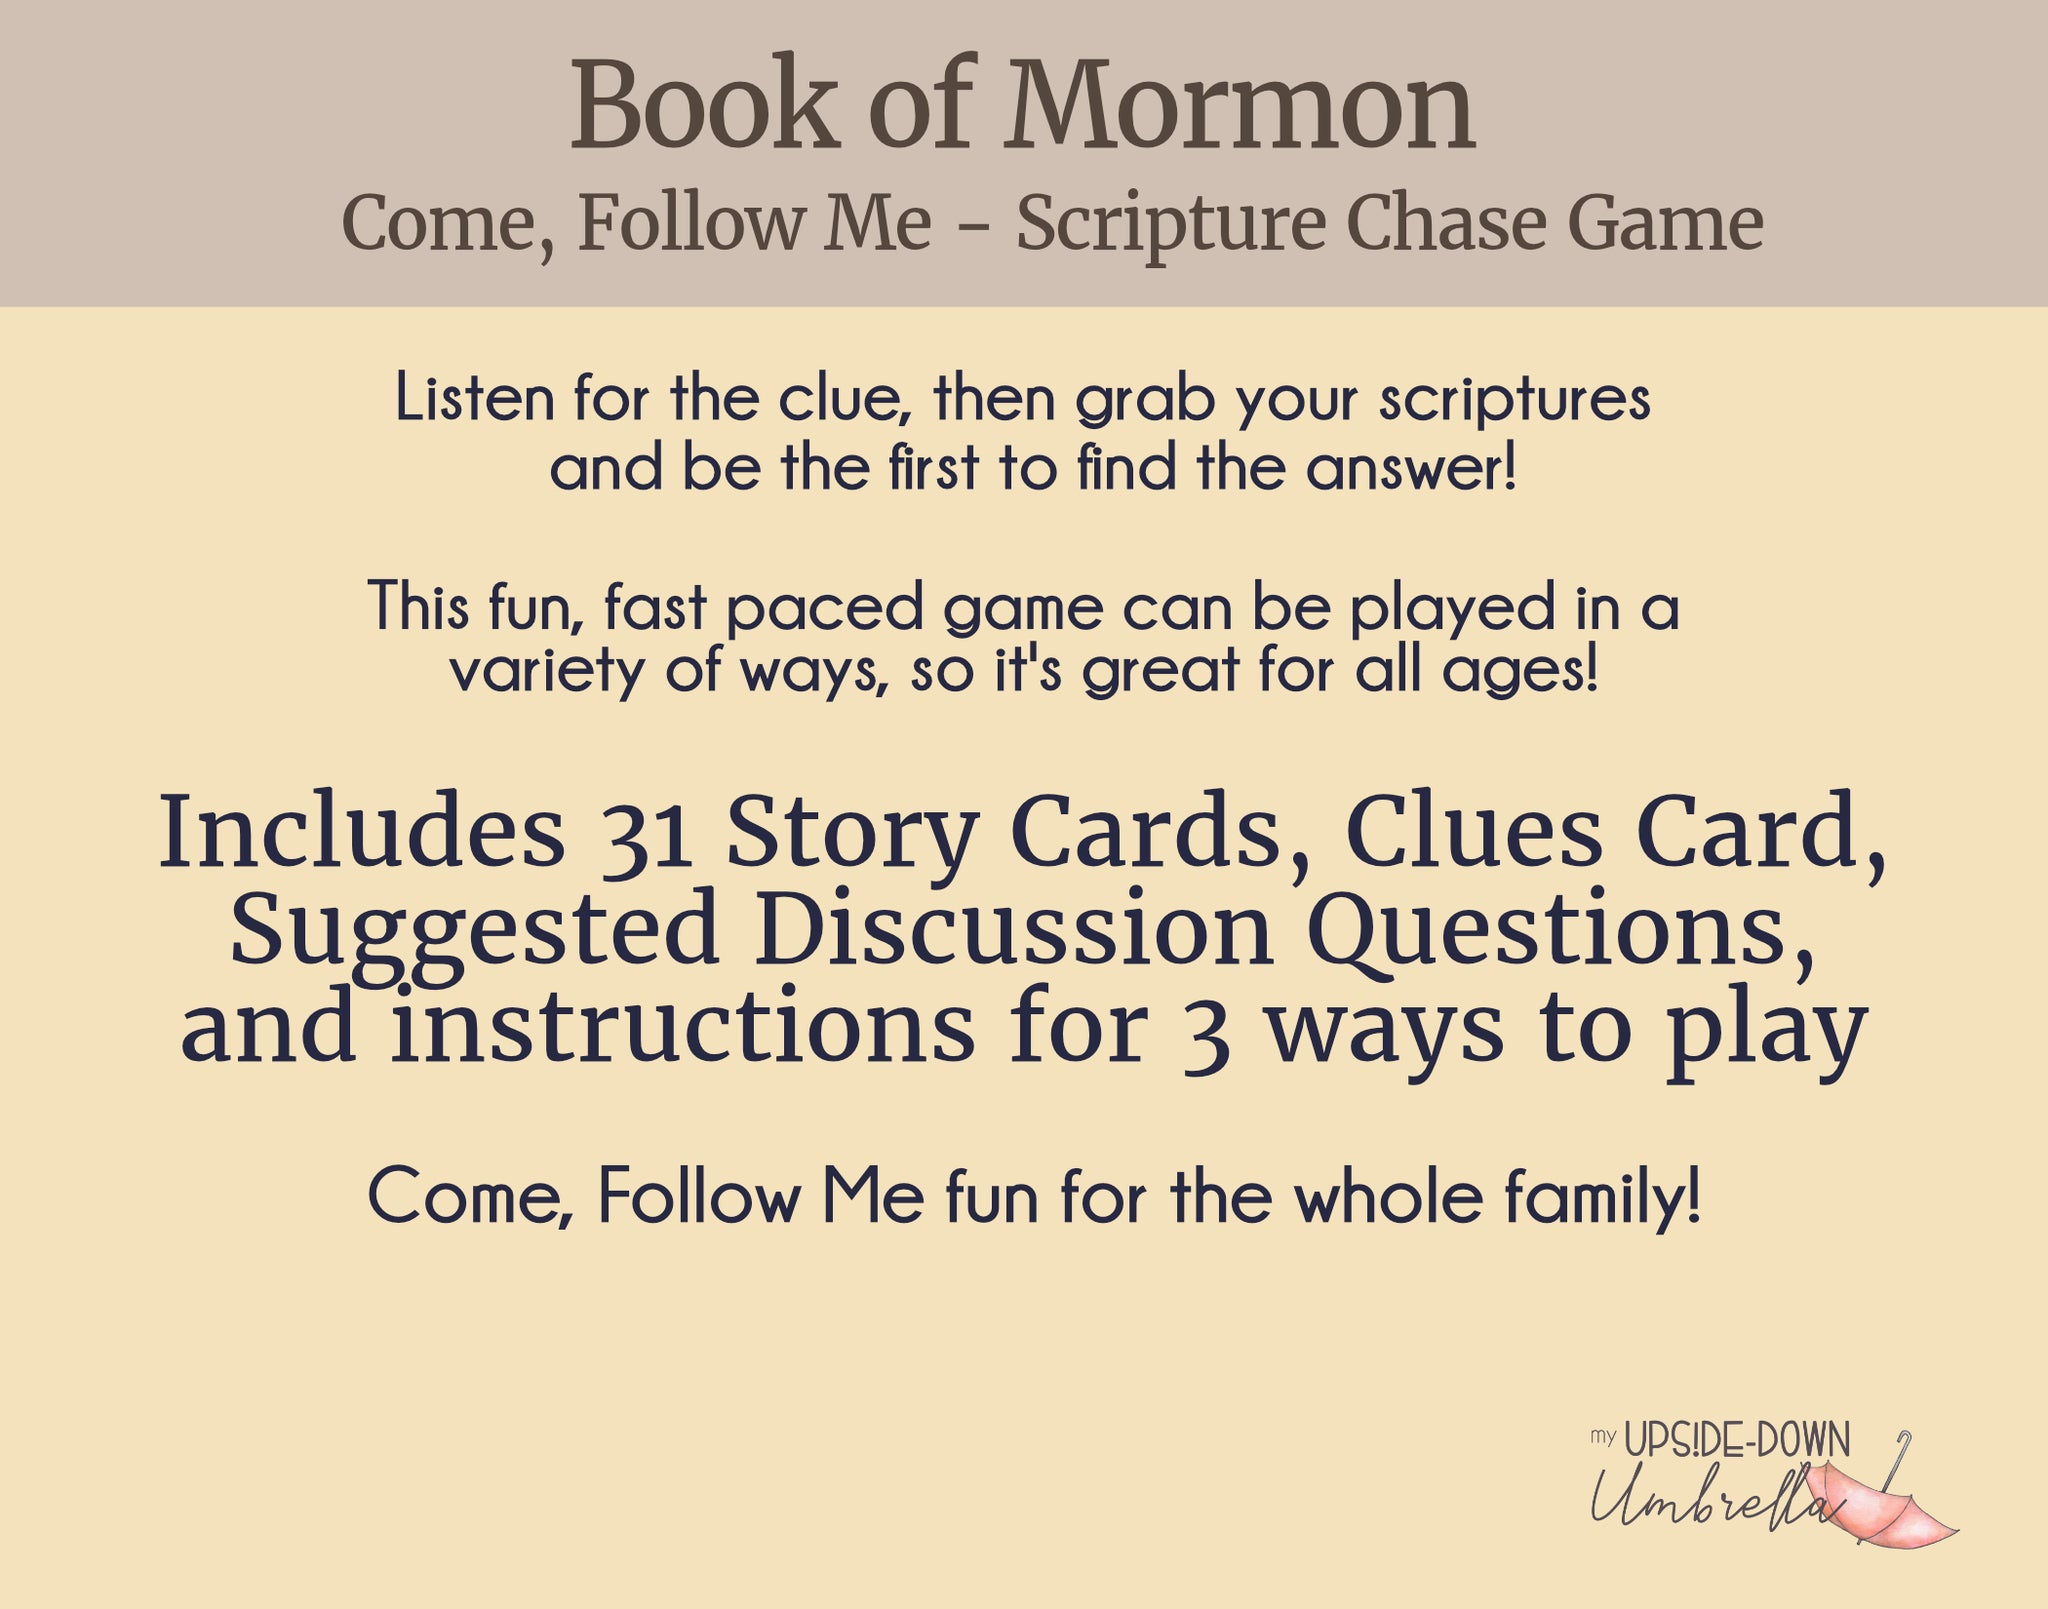 Book of Mormon S.W.A.T.: Scripture Study with a Twist Game